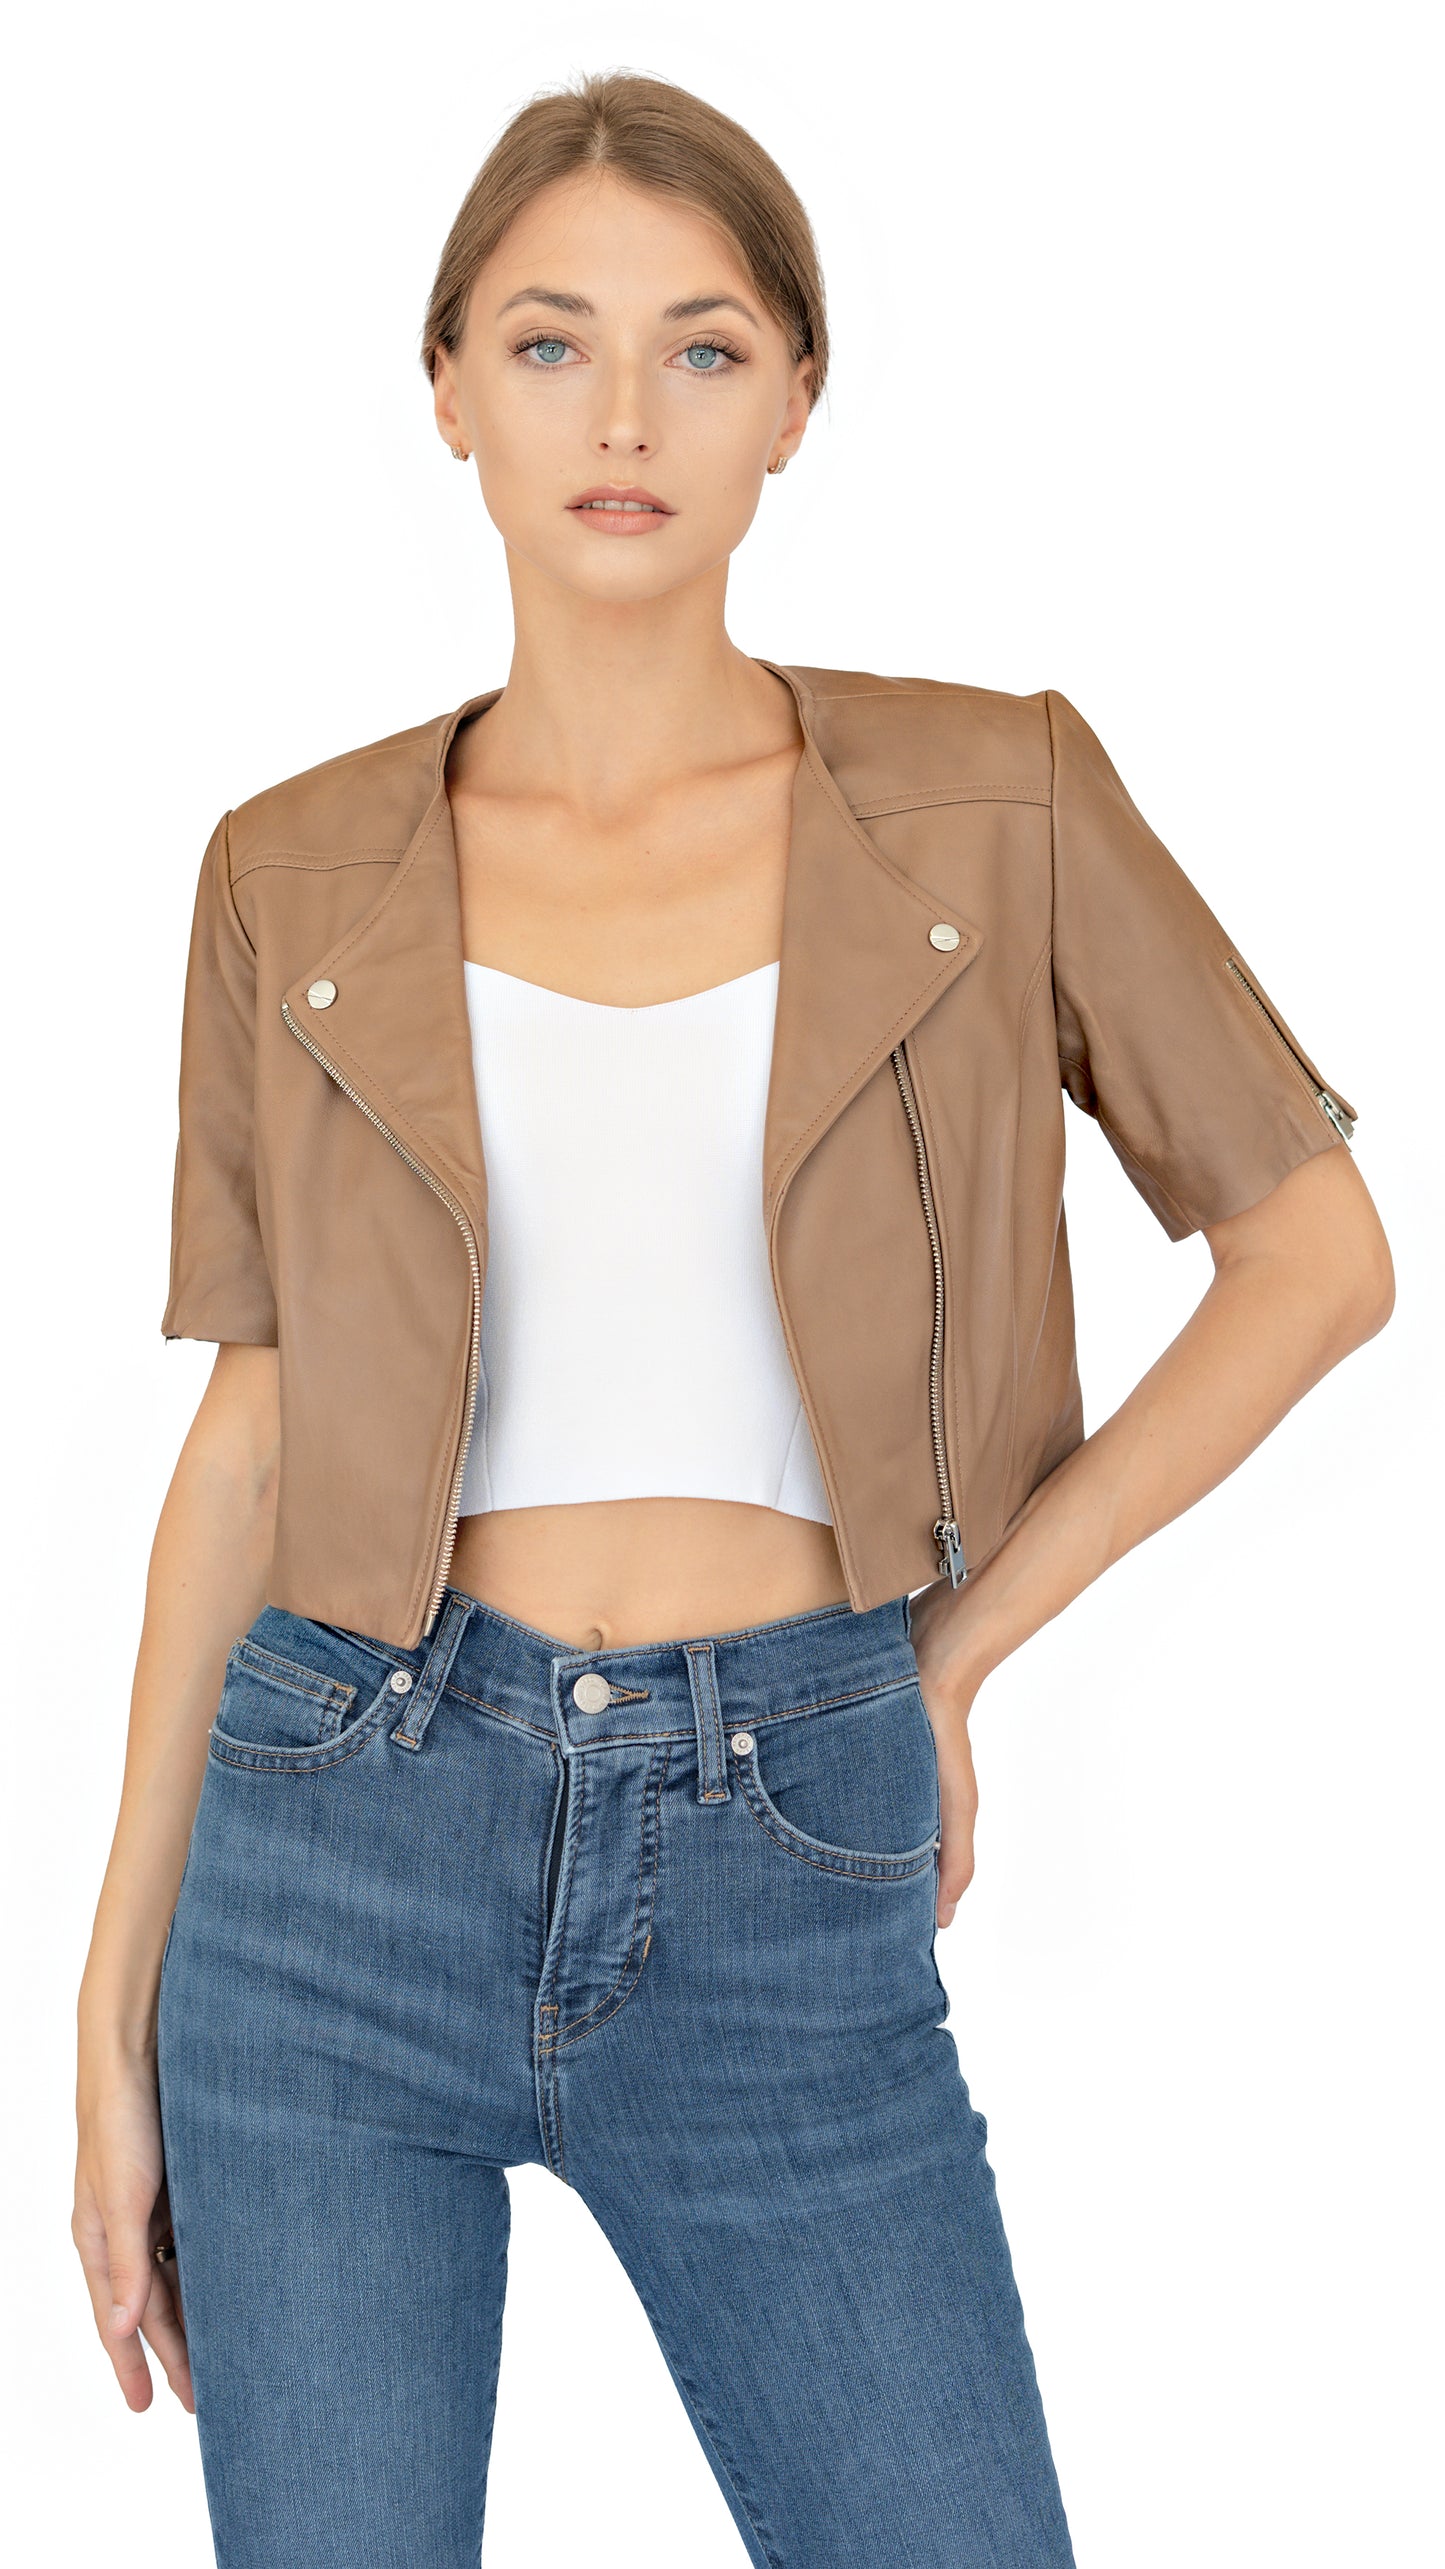 Lamarque real leather cropped jacket in camel color